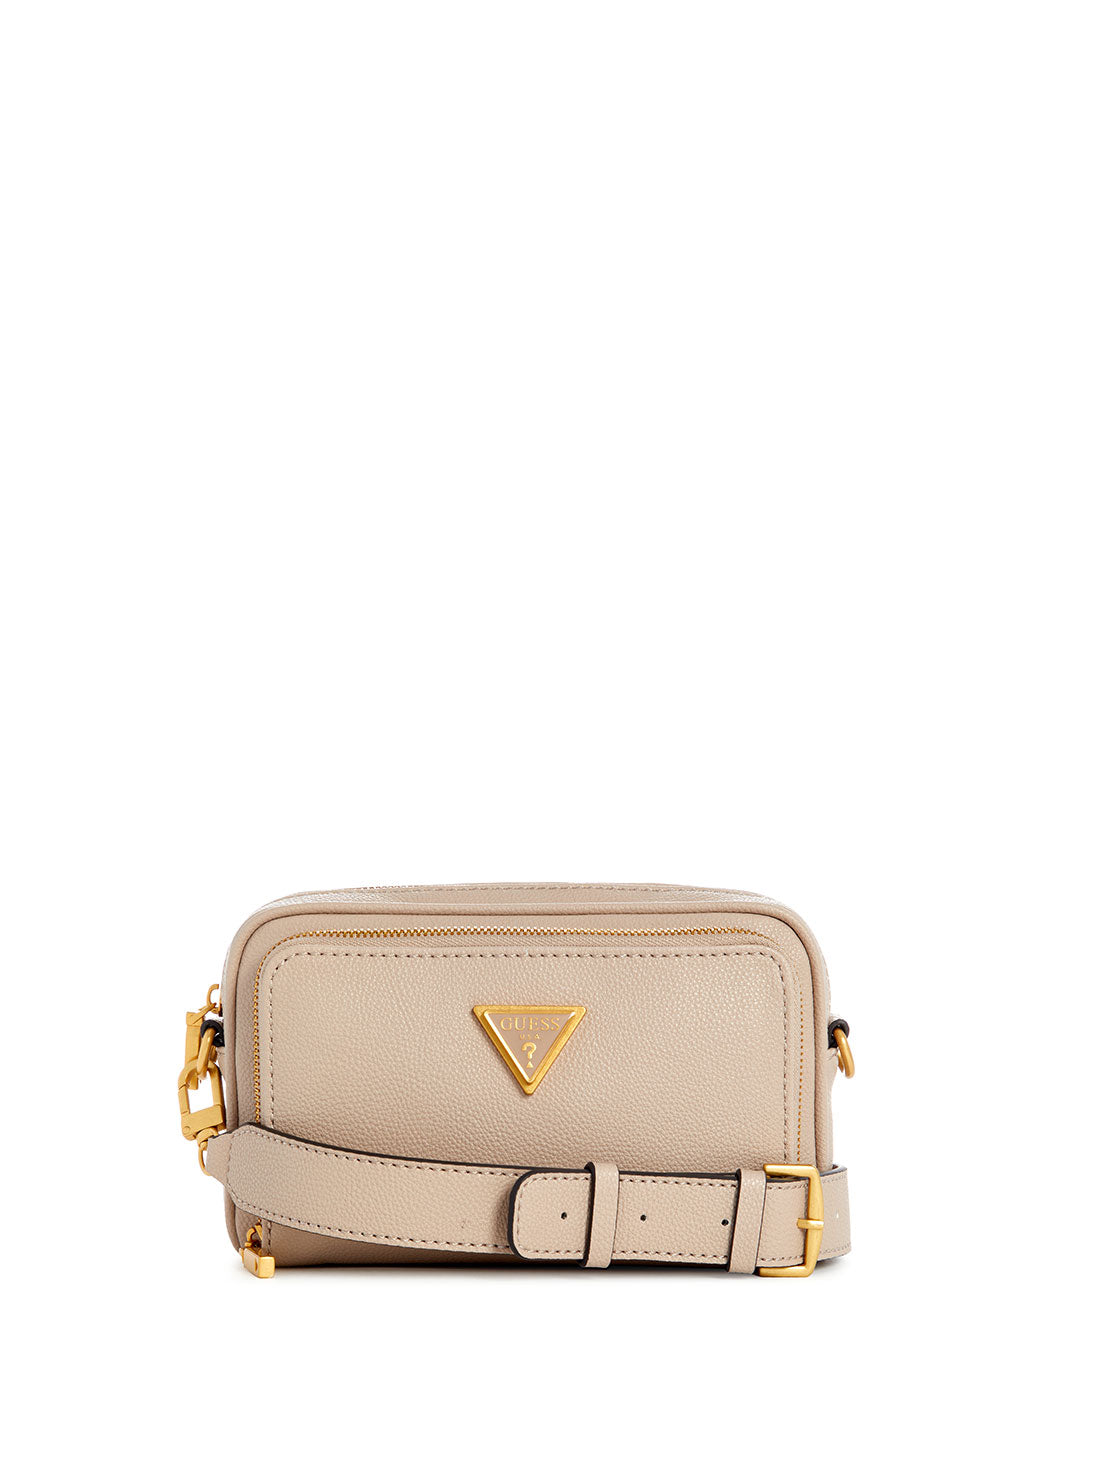 GUESS Beige Cosette Camera Crossbody Bag front view